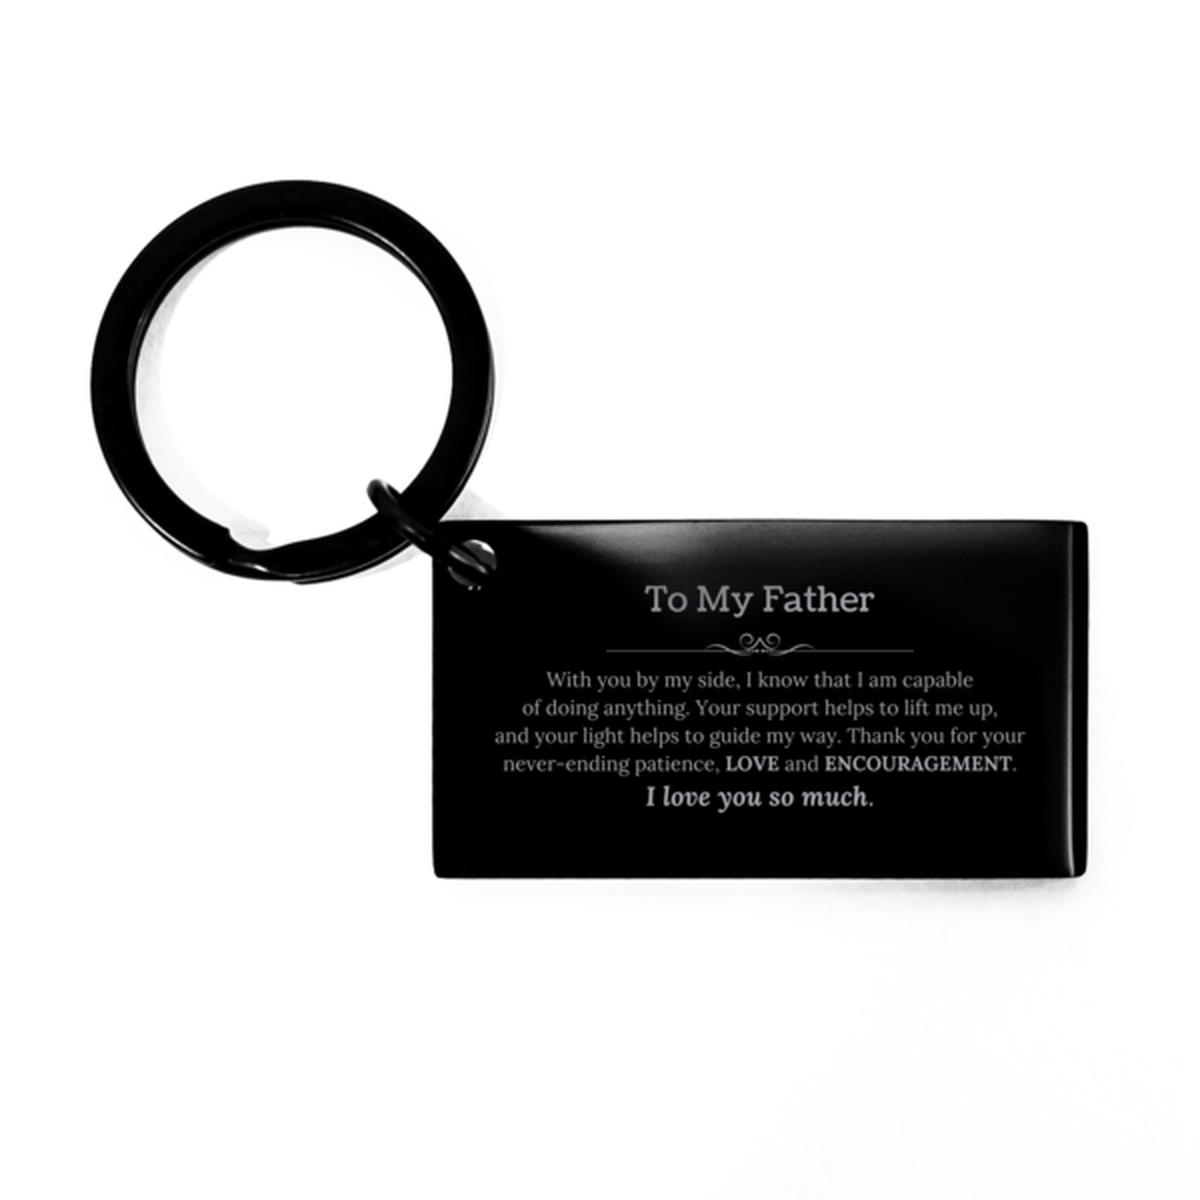 Appreciation Father Keychain Gifts, To My Father Birthday Christmas Wedding Keepsake Gifts for Father With you by my side, I know that I am capable of doing anything. I love you so much